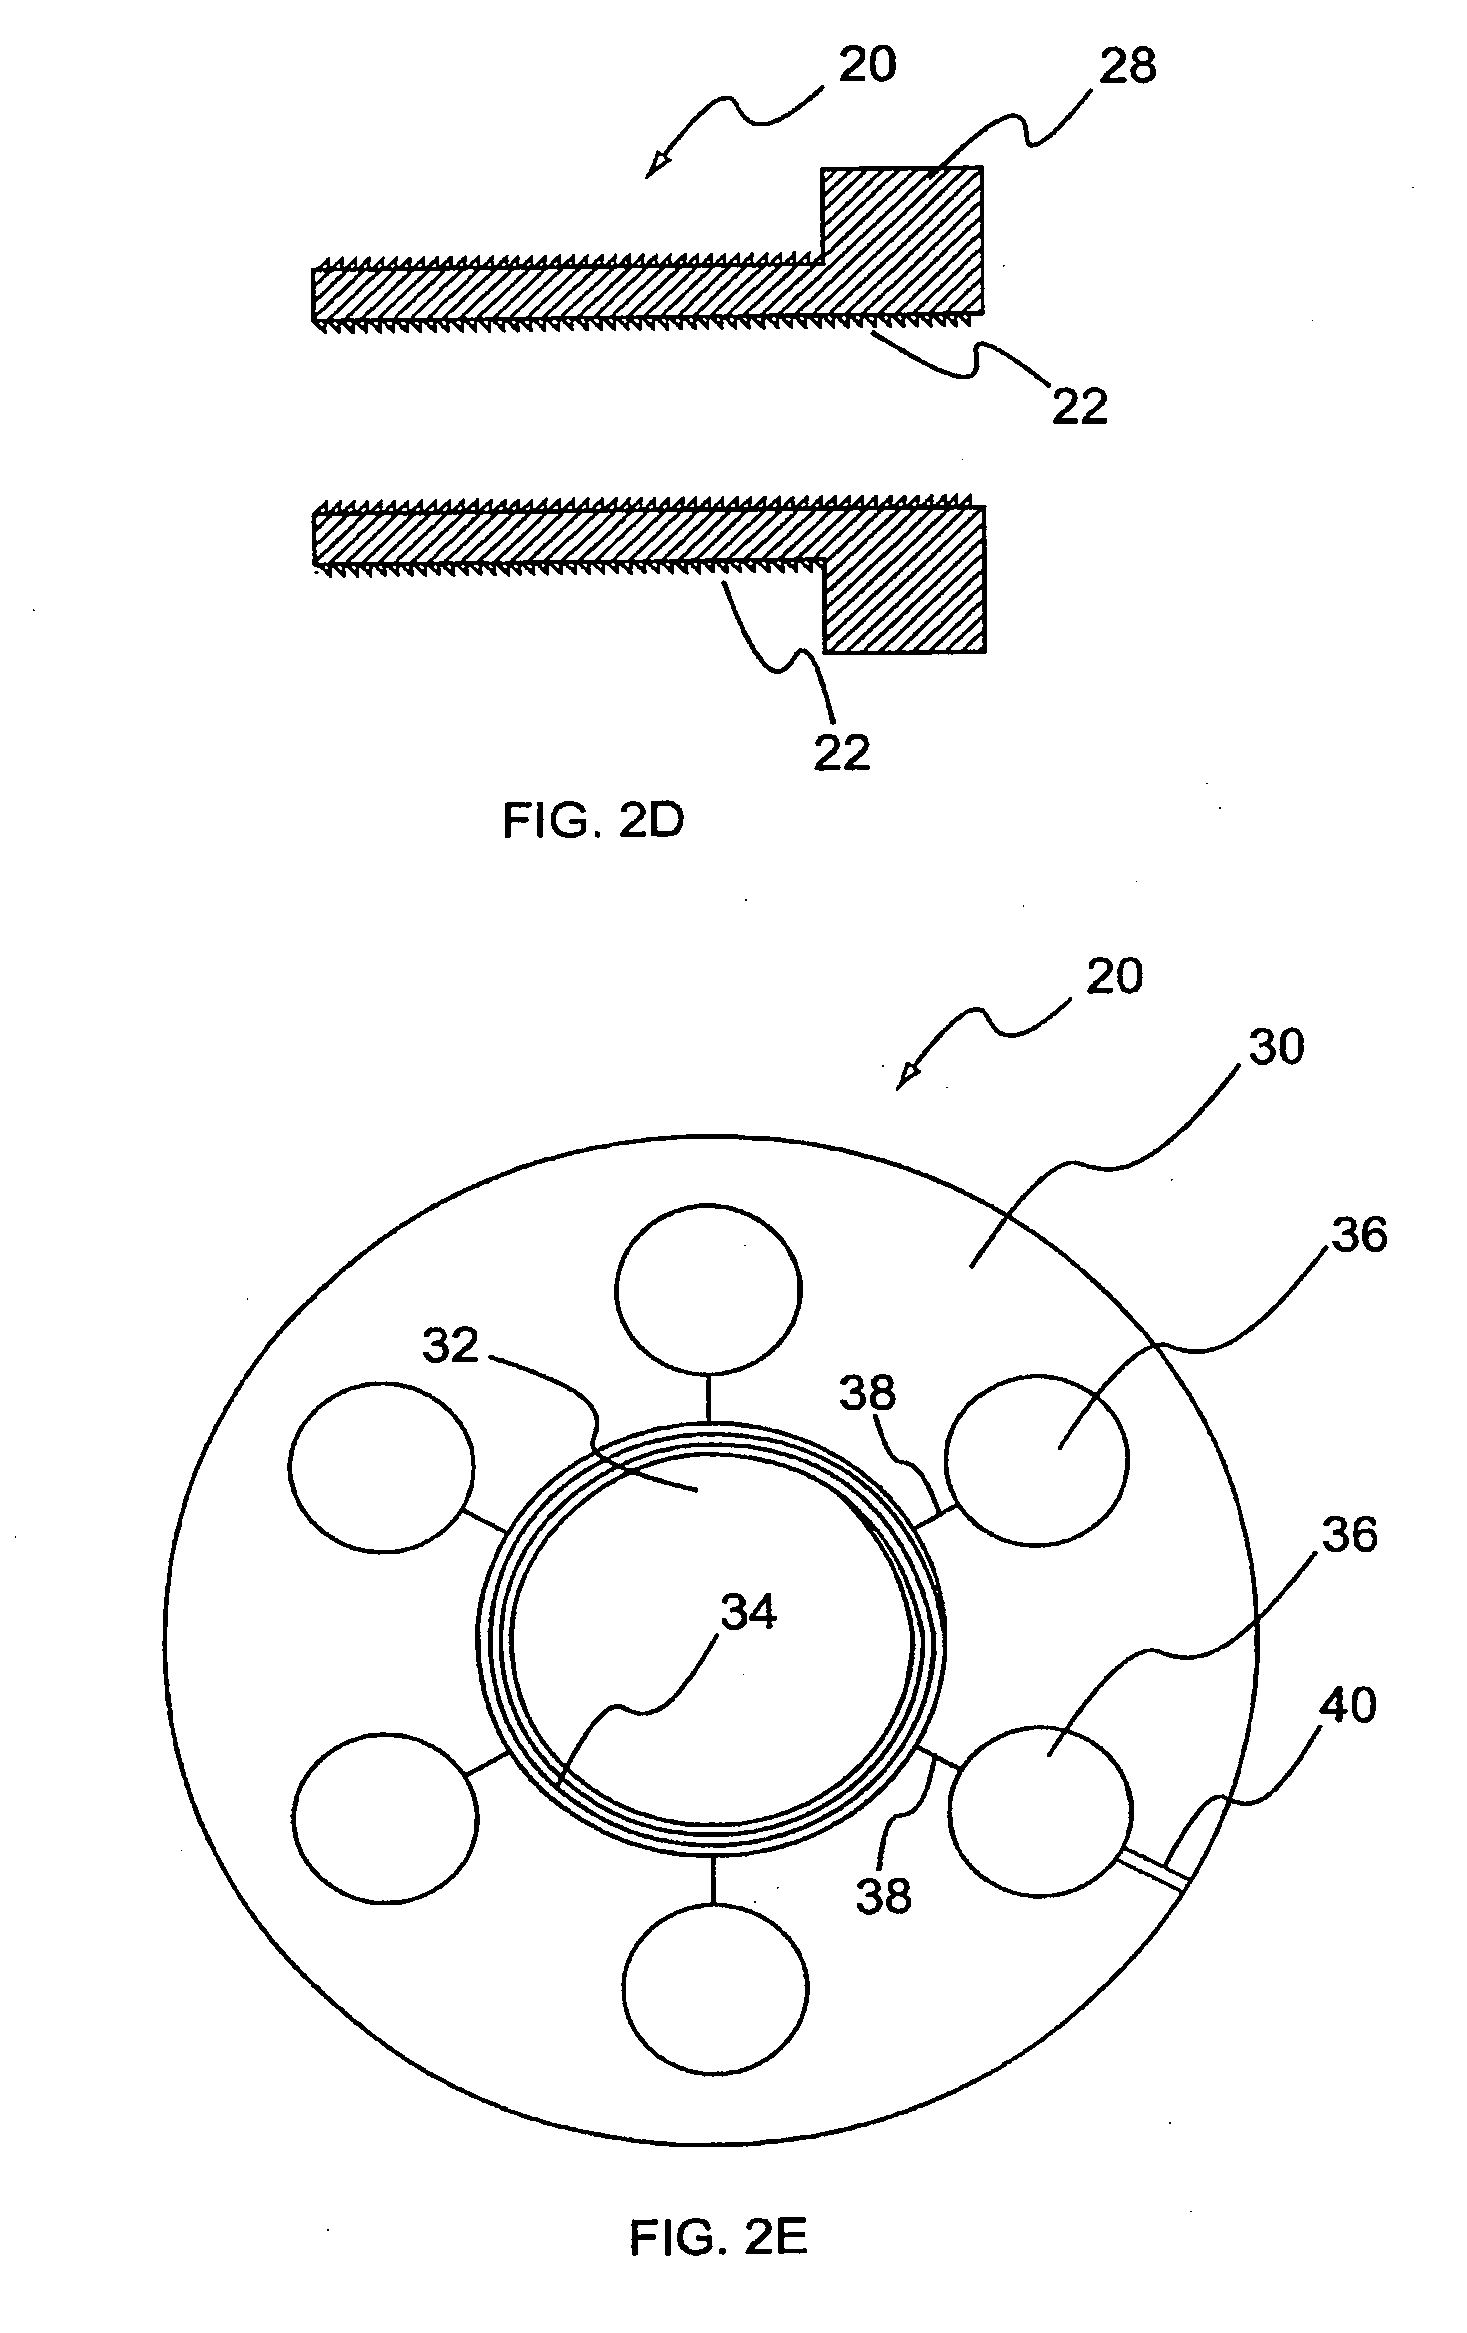 Method for the fixation of bone structures